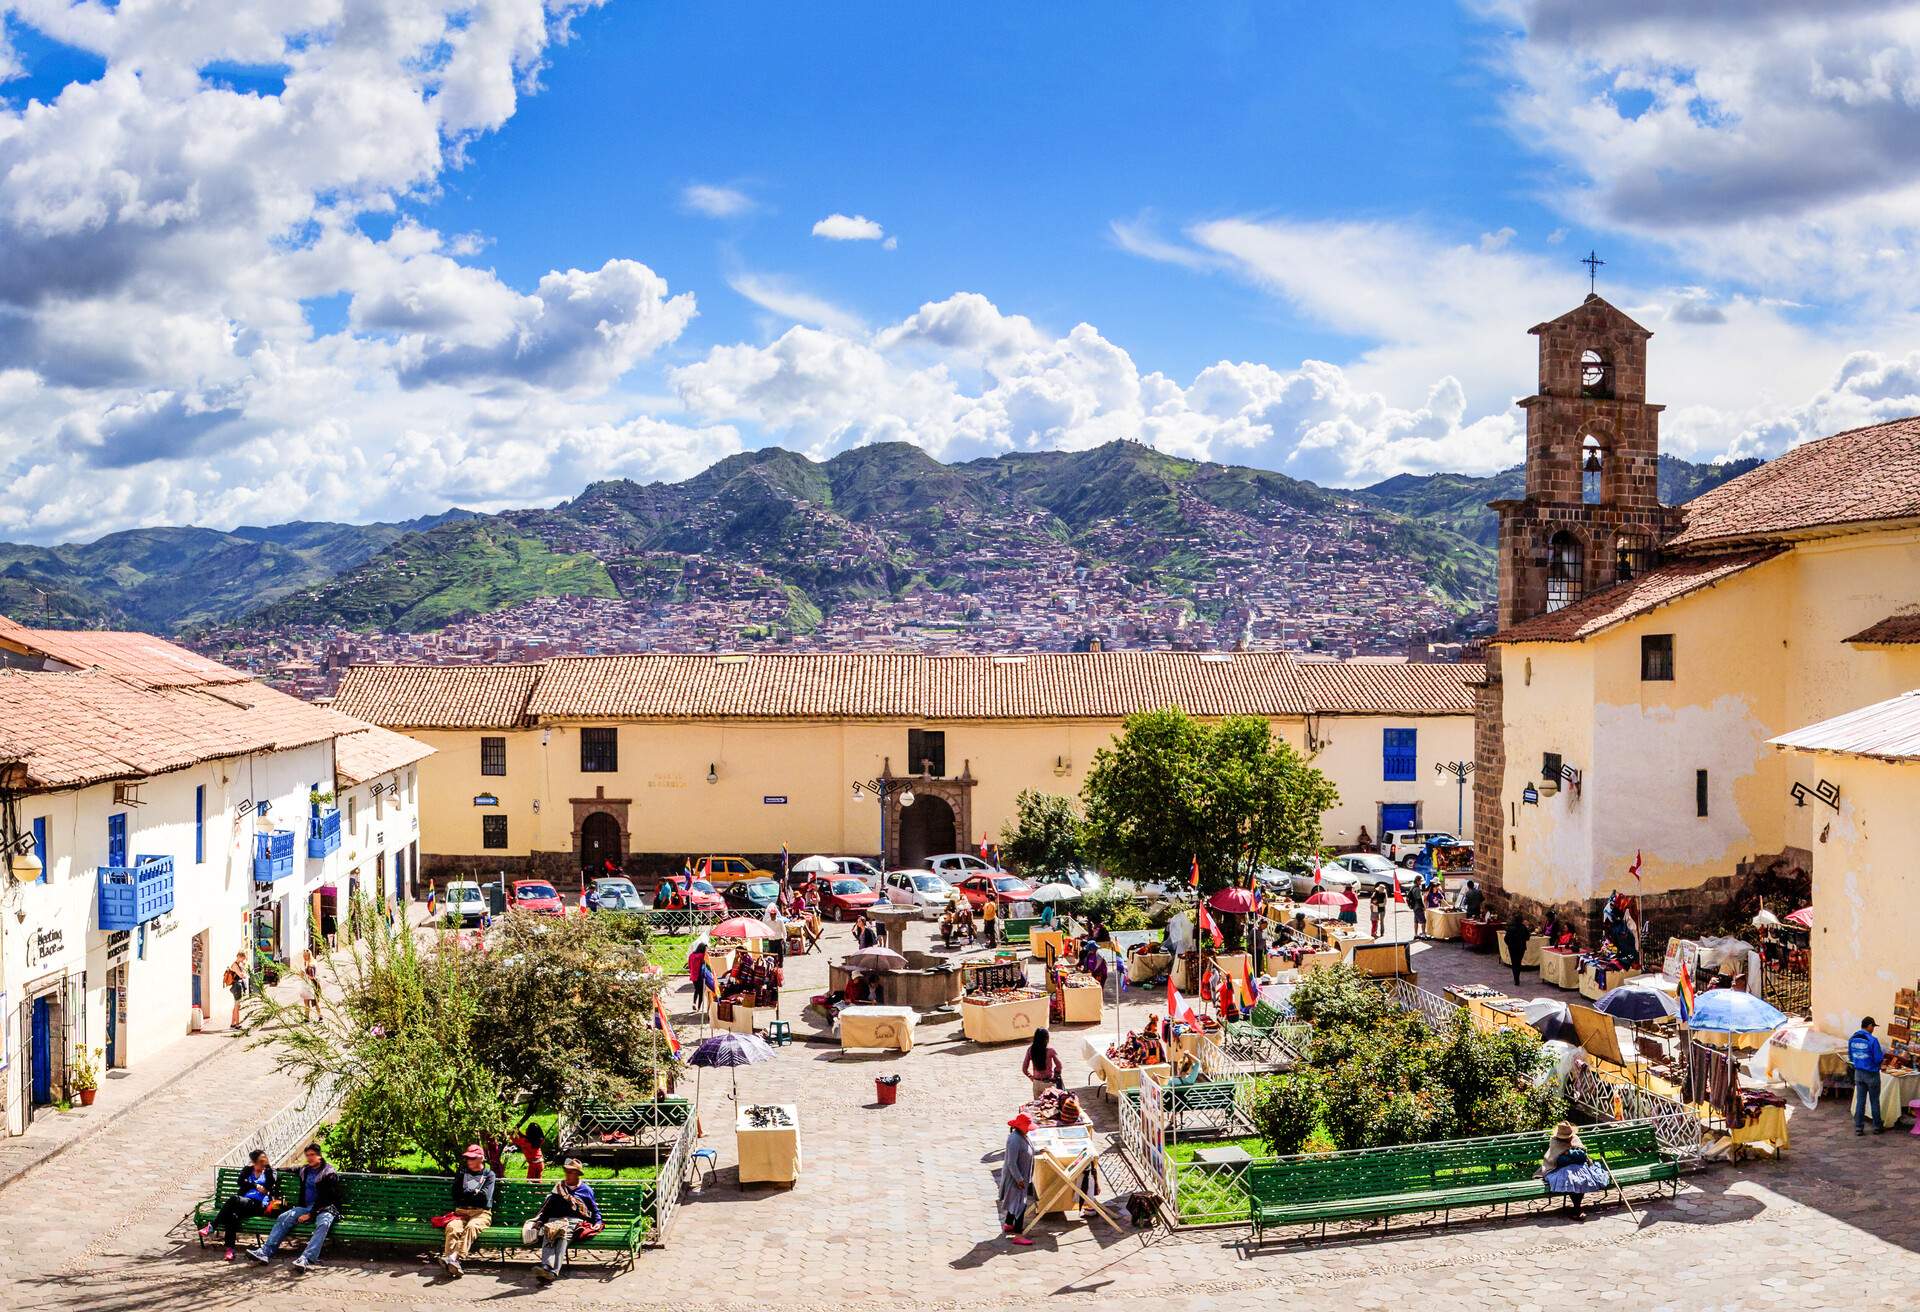 View of San Blas square, Cuzco, Peru..Image taken outdoors, daylight..Several images stitched together, digital composite.